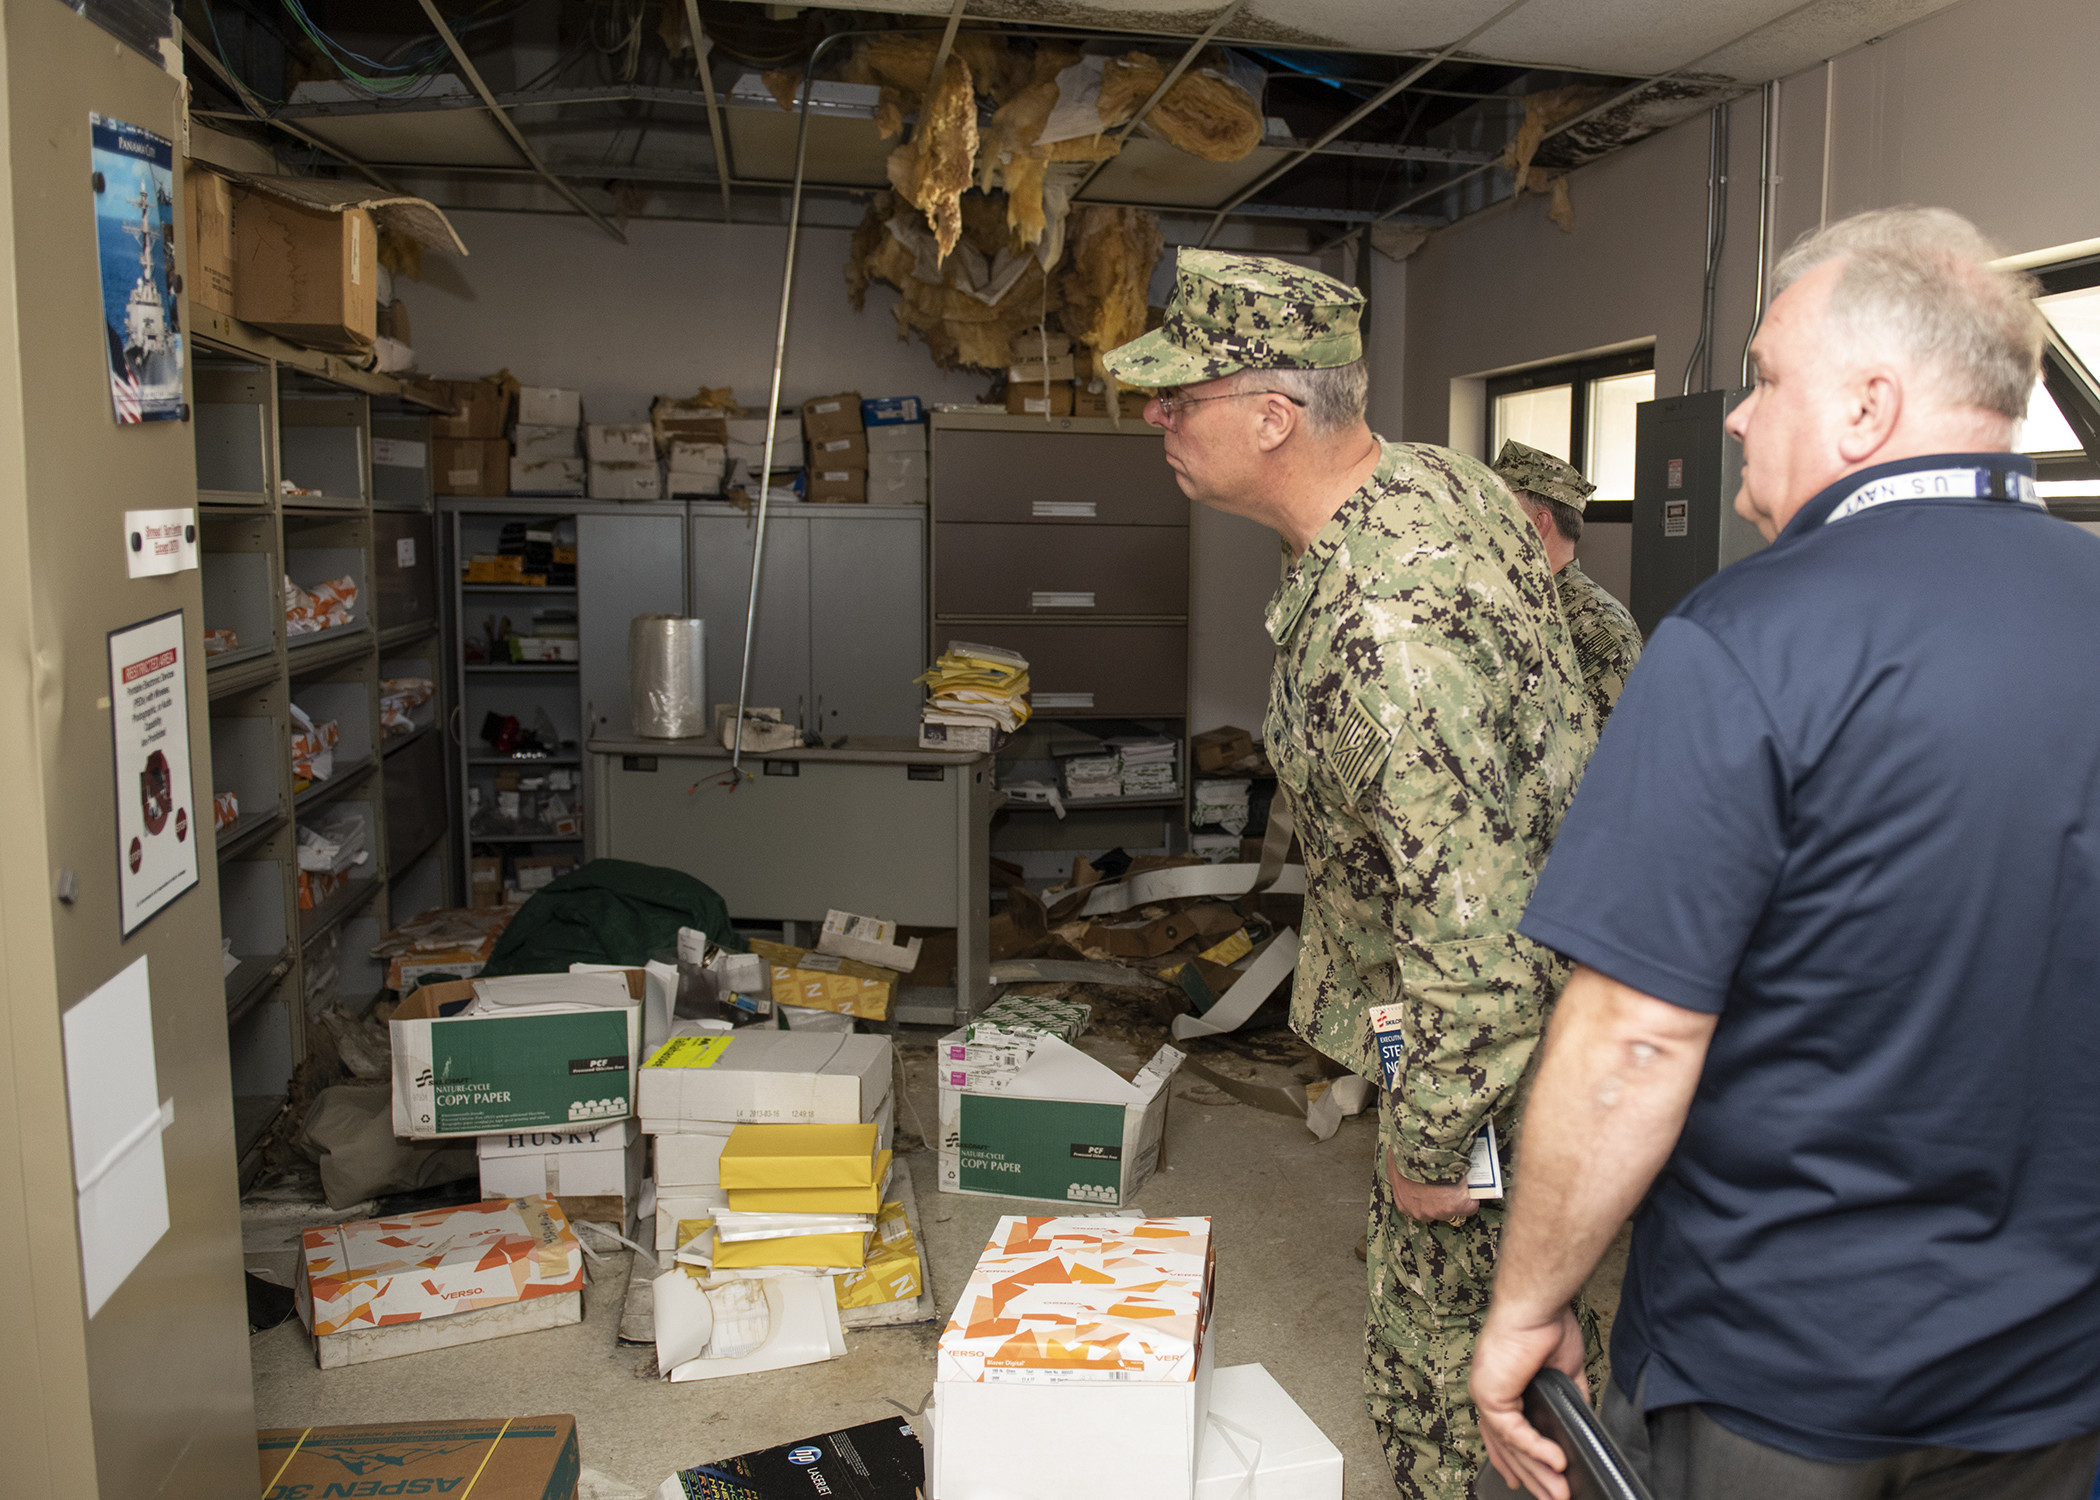 NSWC PCD slated receive $110.2 million for Hurricane Michael repairs > Naval Sea Systems Command > Saved News Module